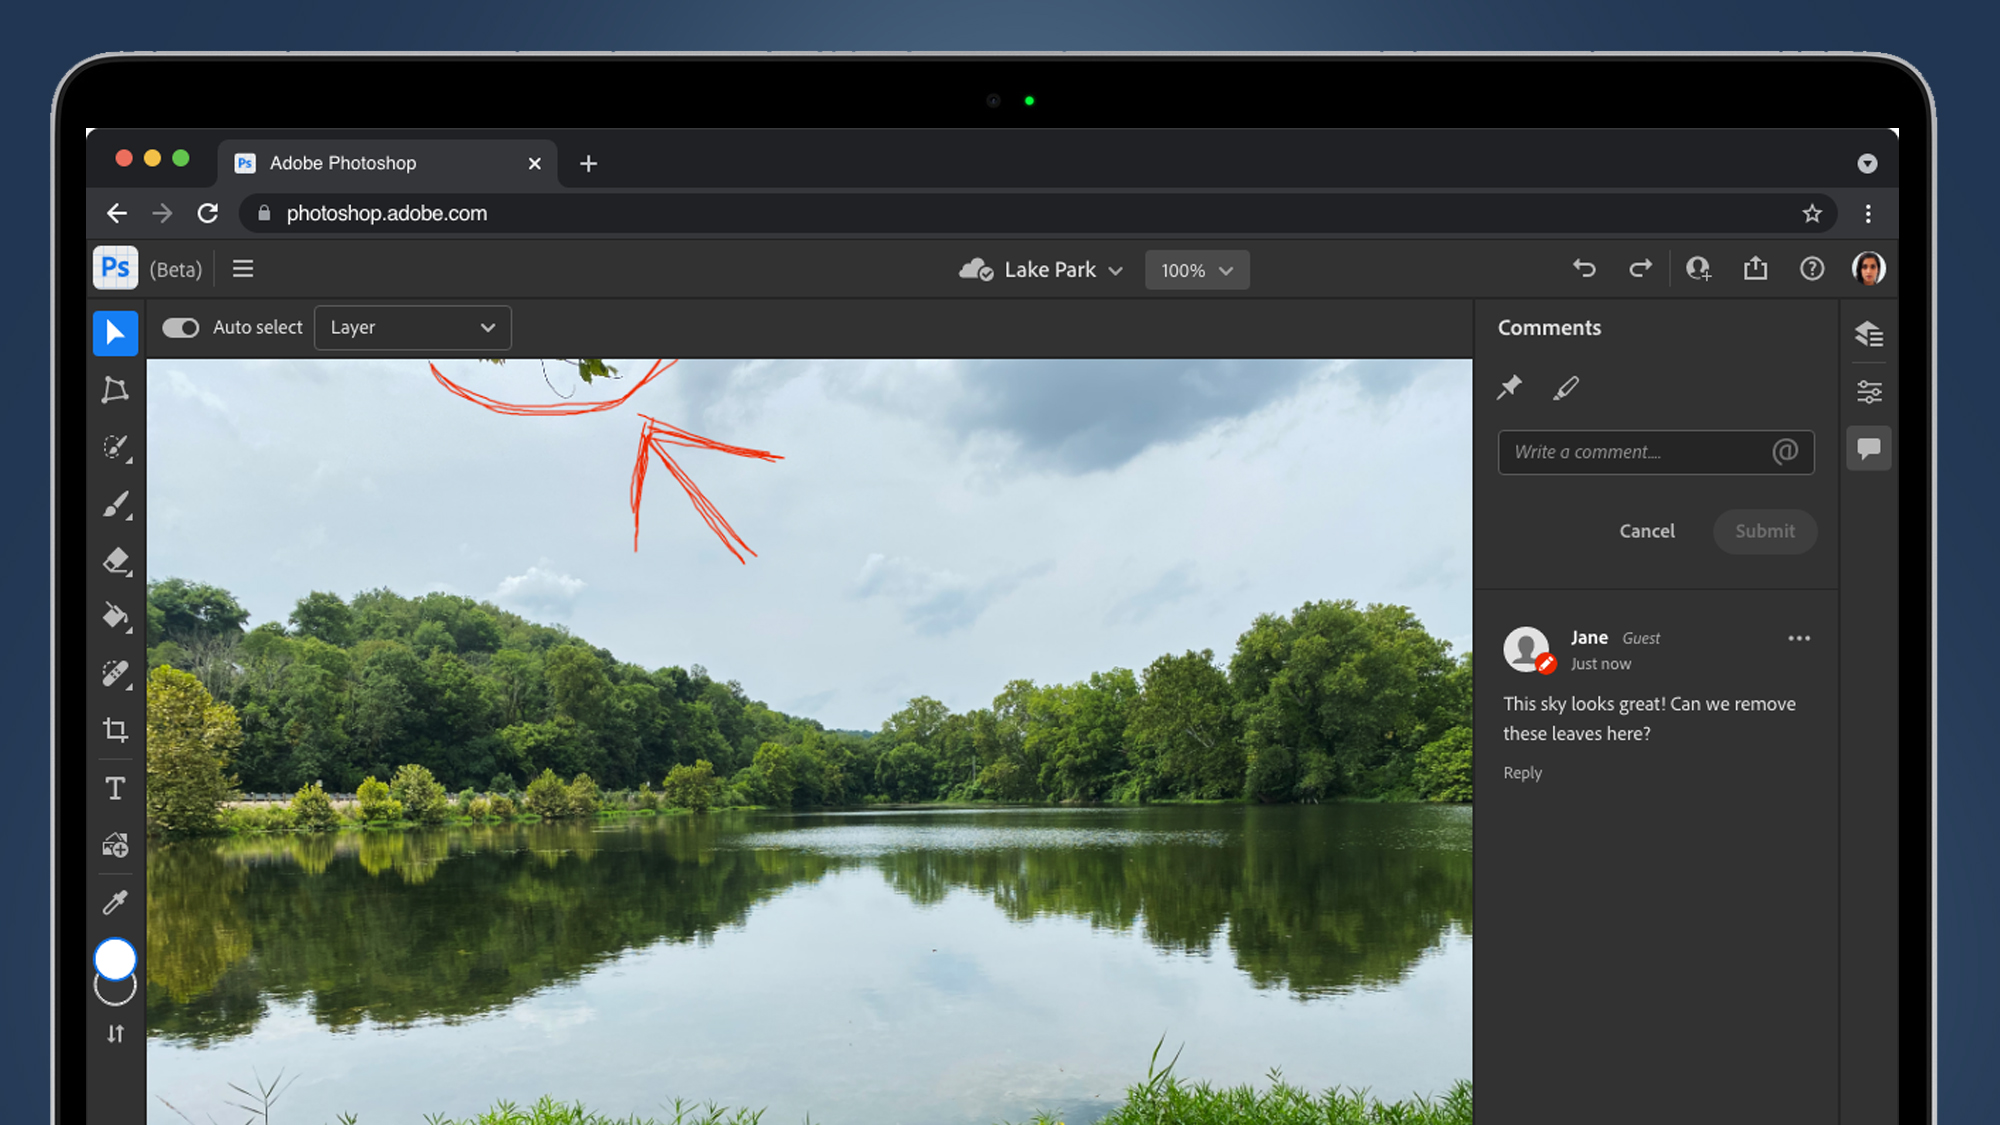 photoshop-comes-to-the-web-browser-and-gets-4-other-big-new-tools